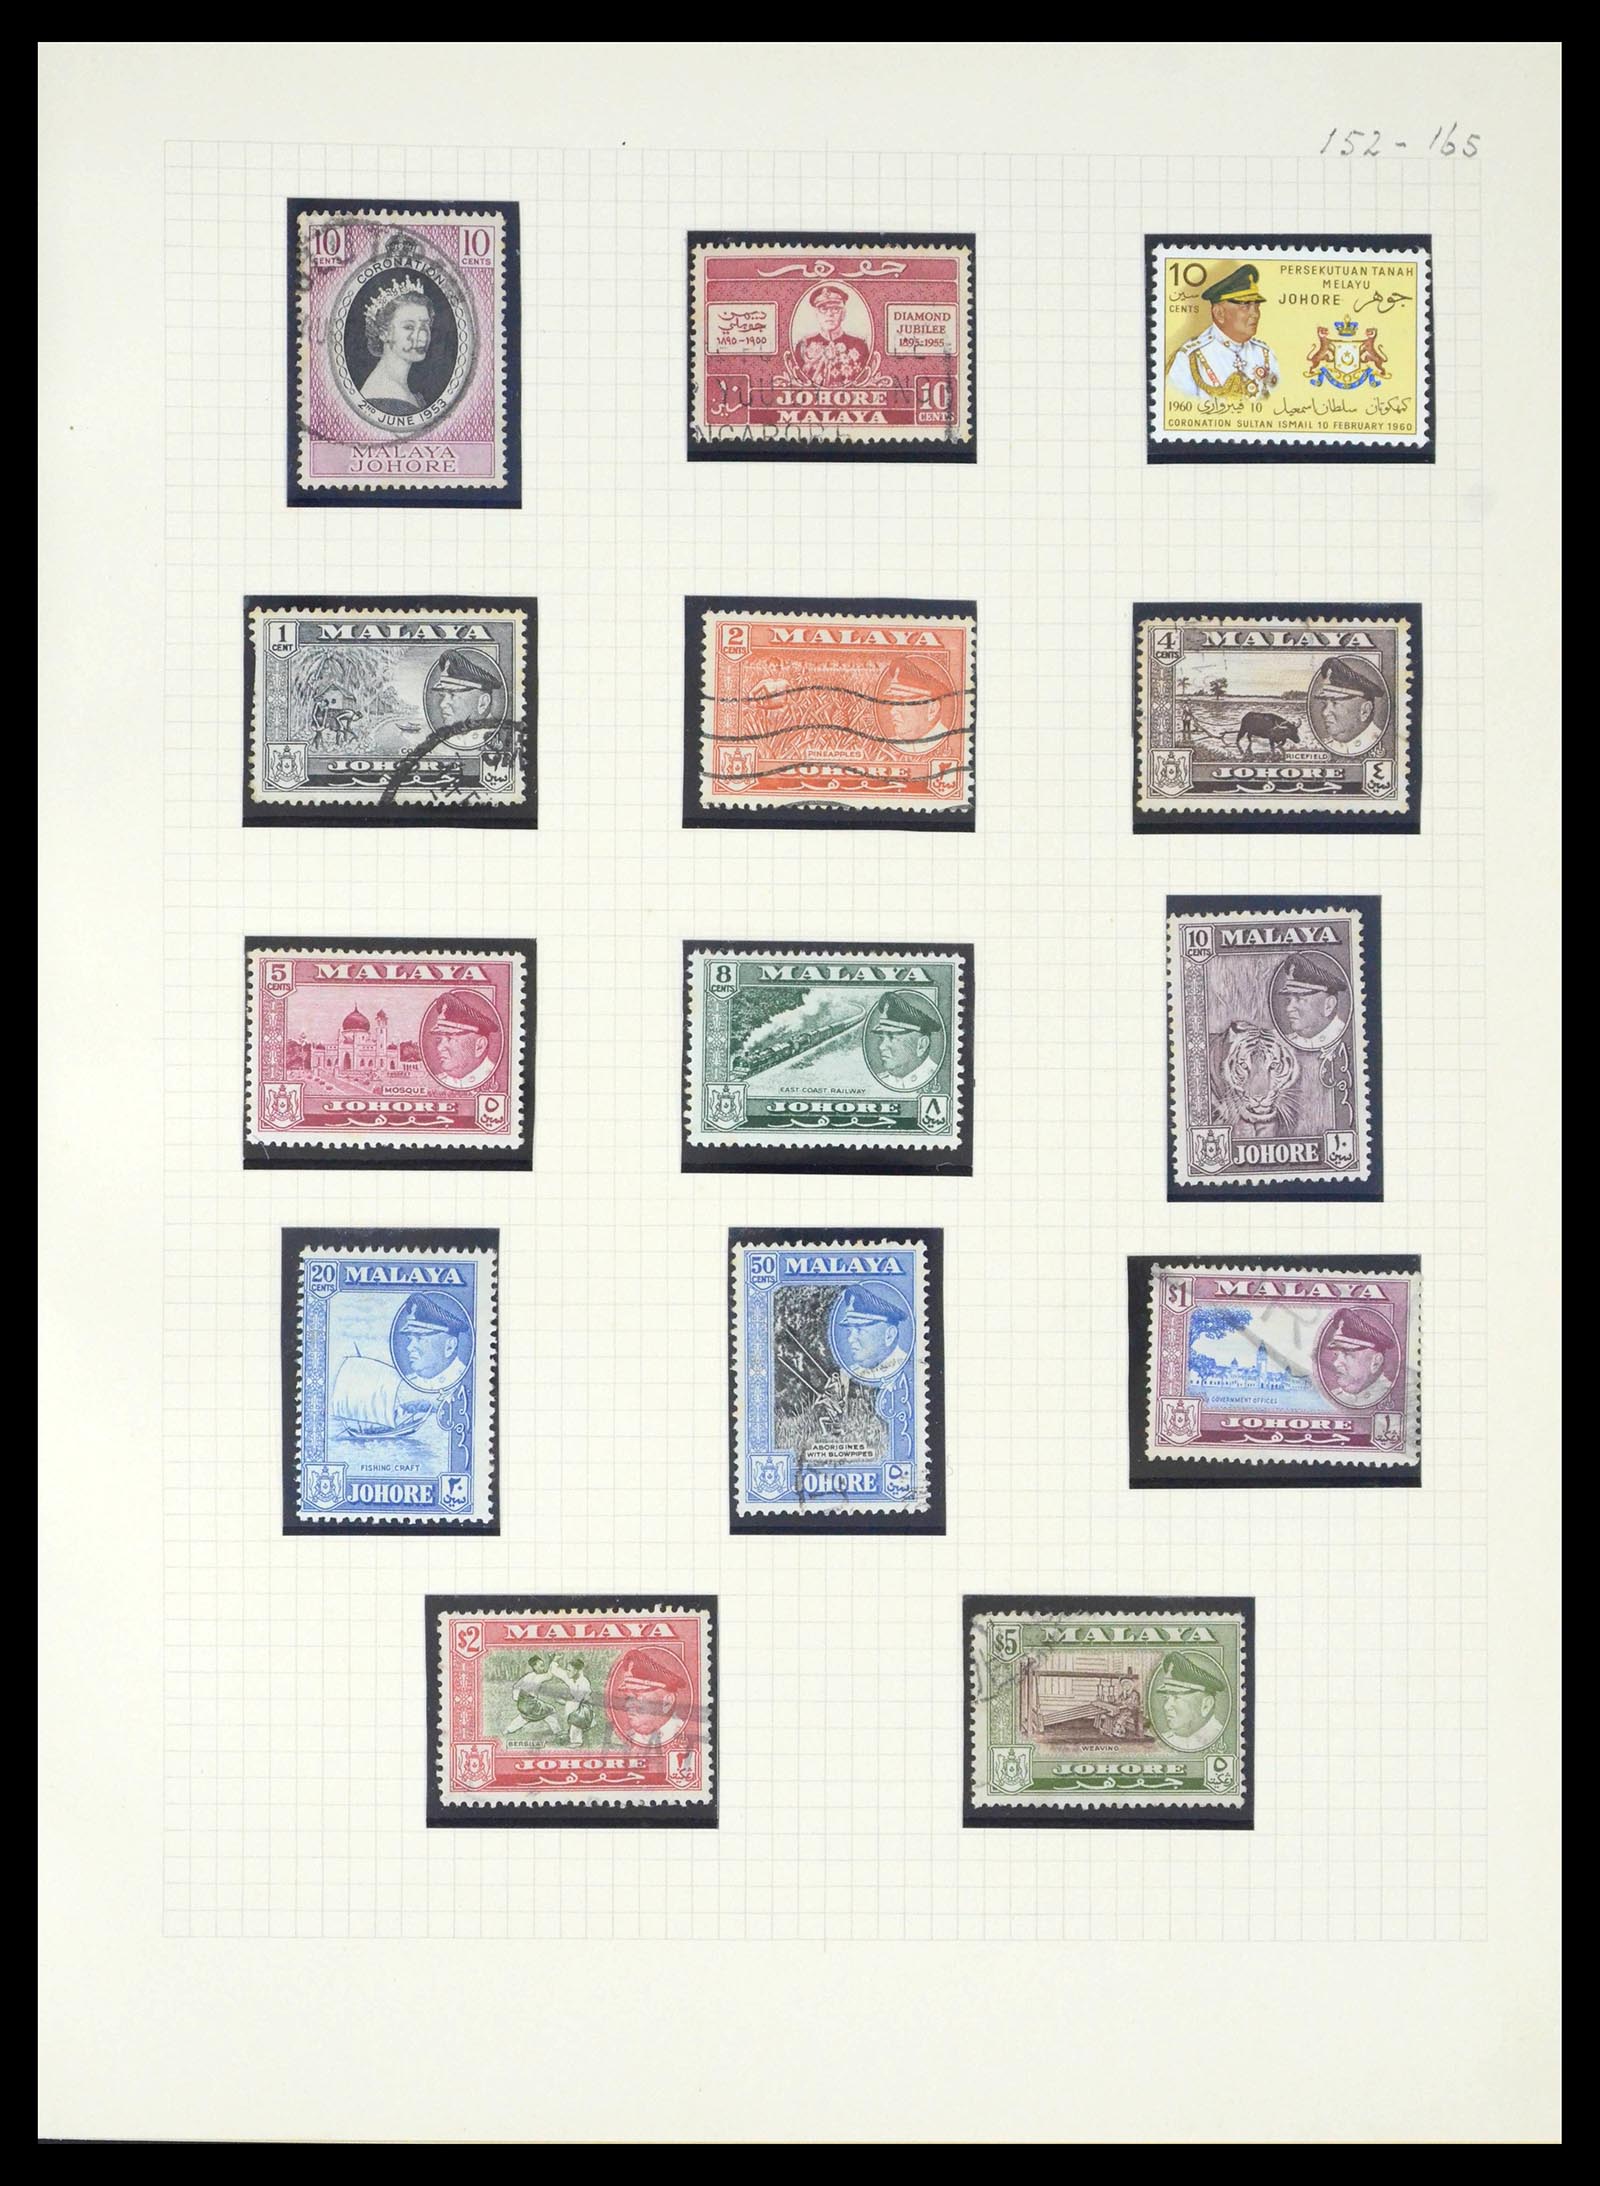 39470 0012 - Stamp collection 39470 Malayan States 1880-1965.